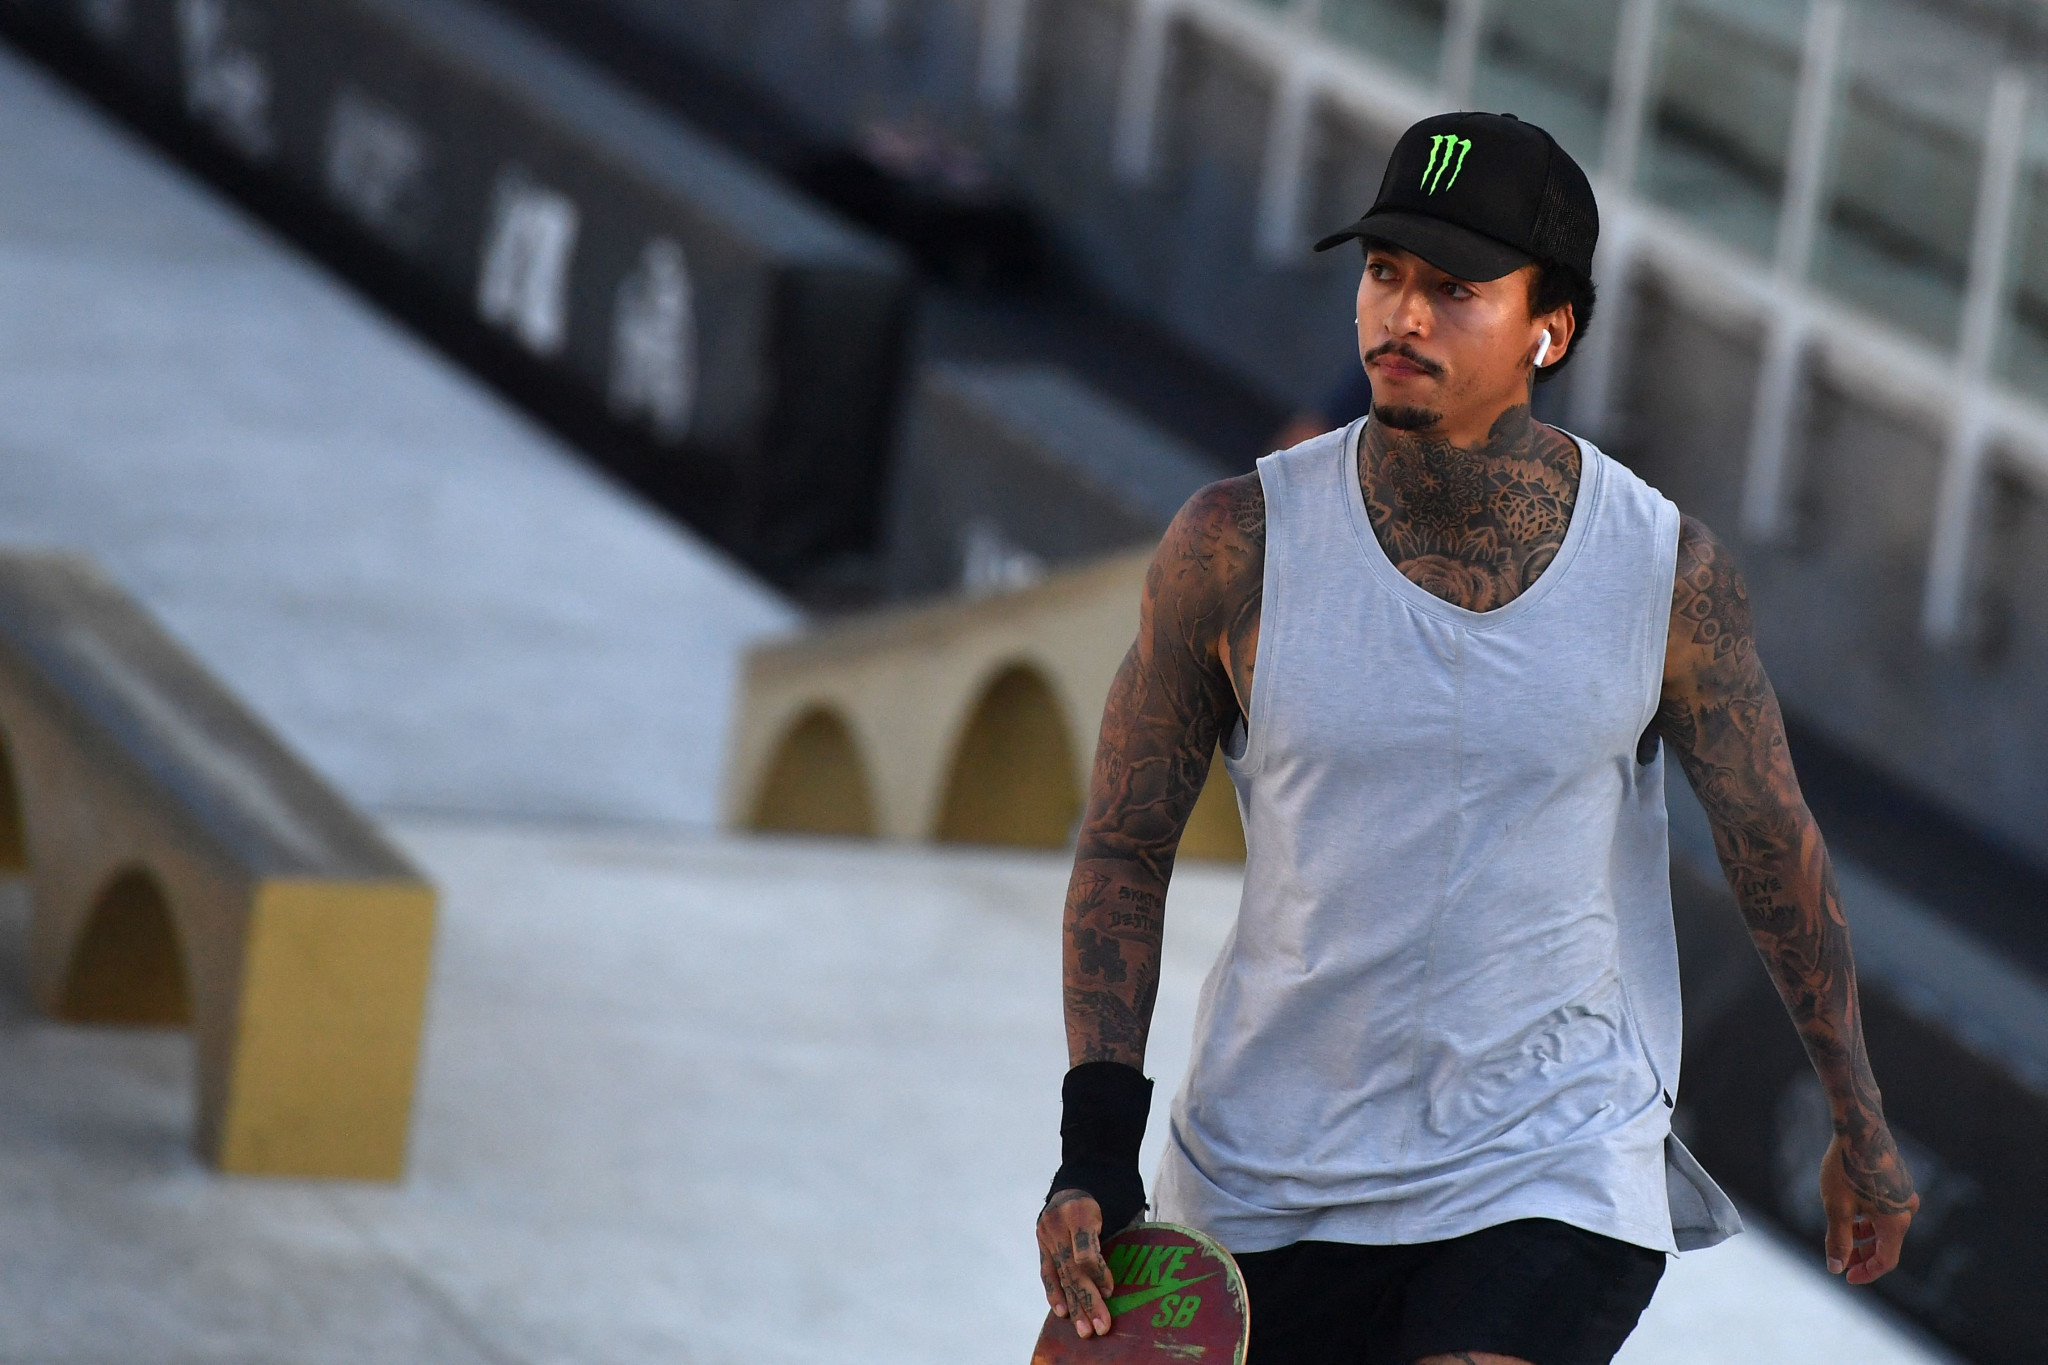 Nyjah Huston top scored in the men's semi-final in Rome ©Getty Images